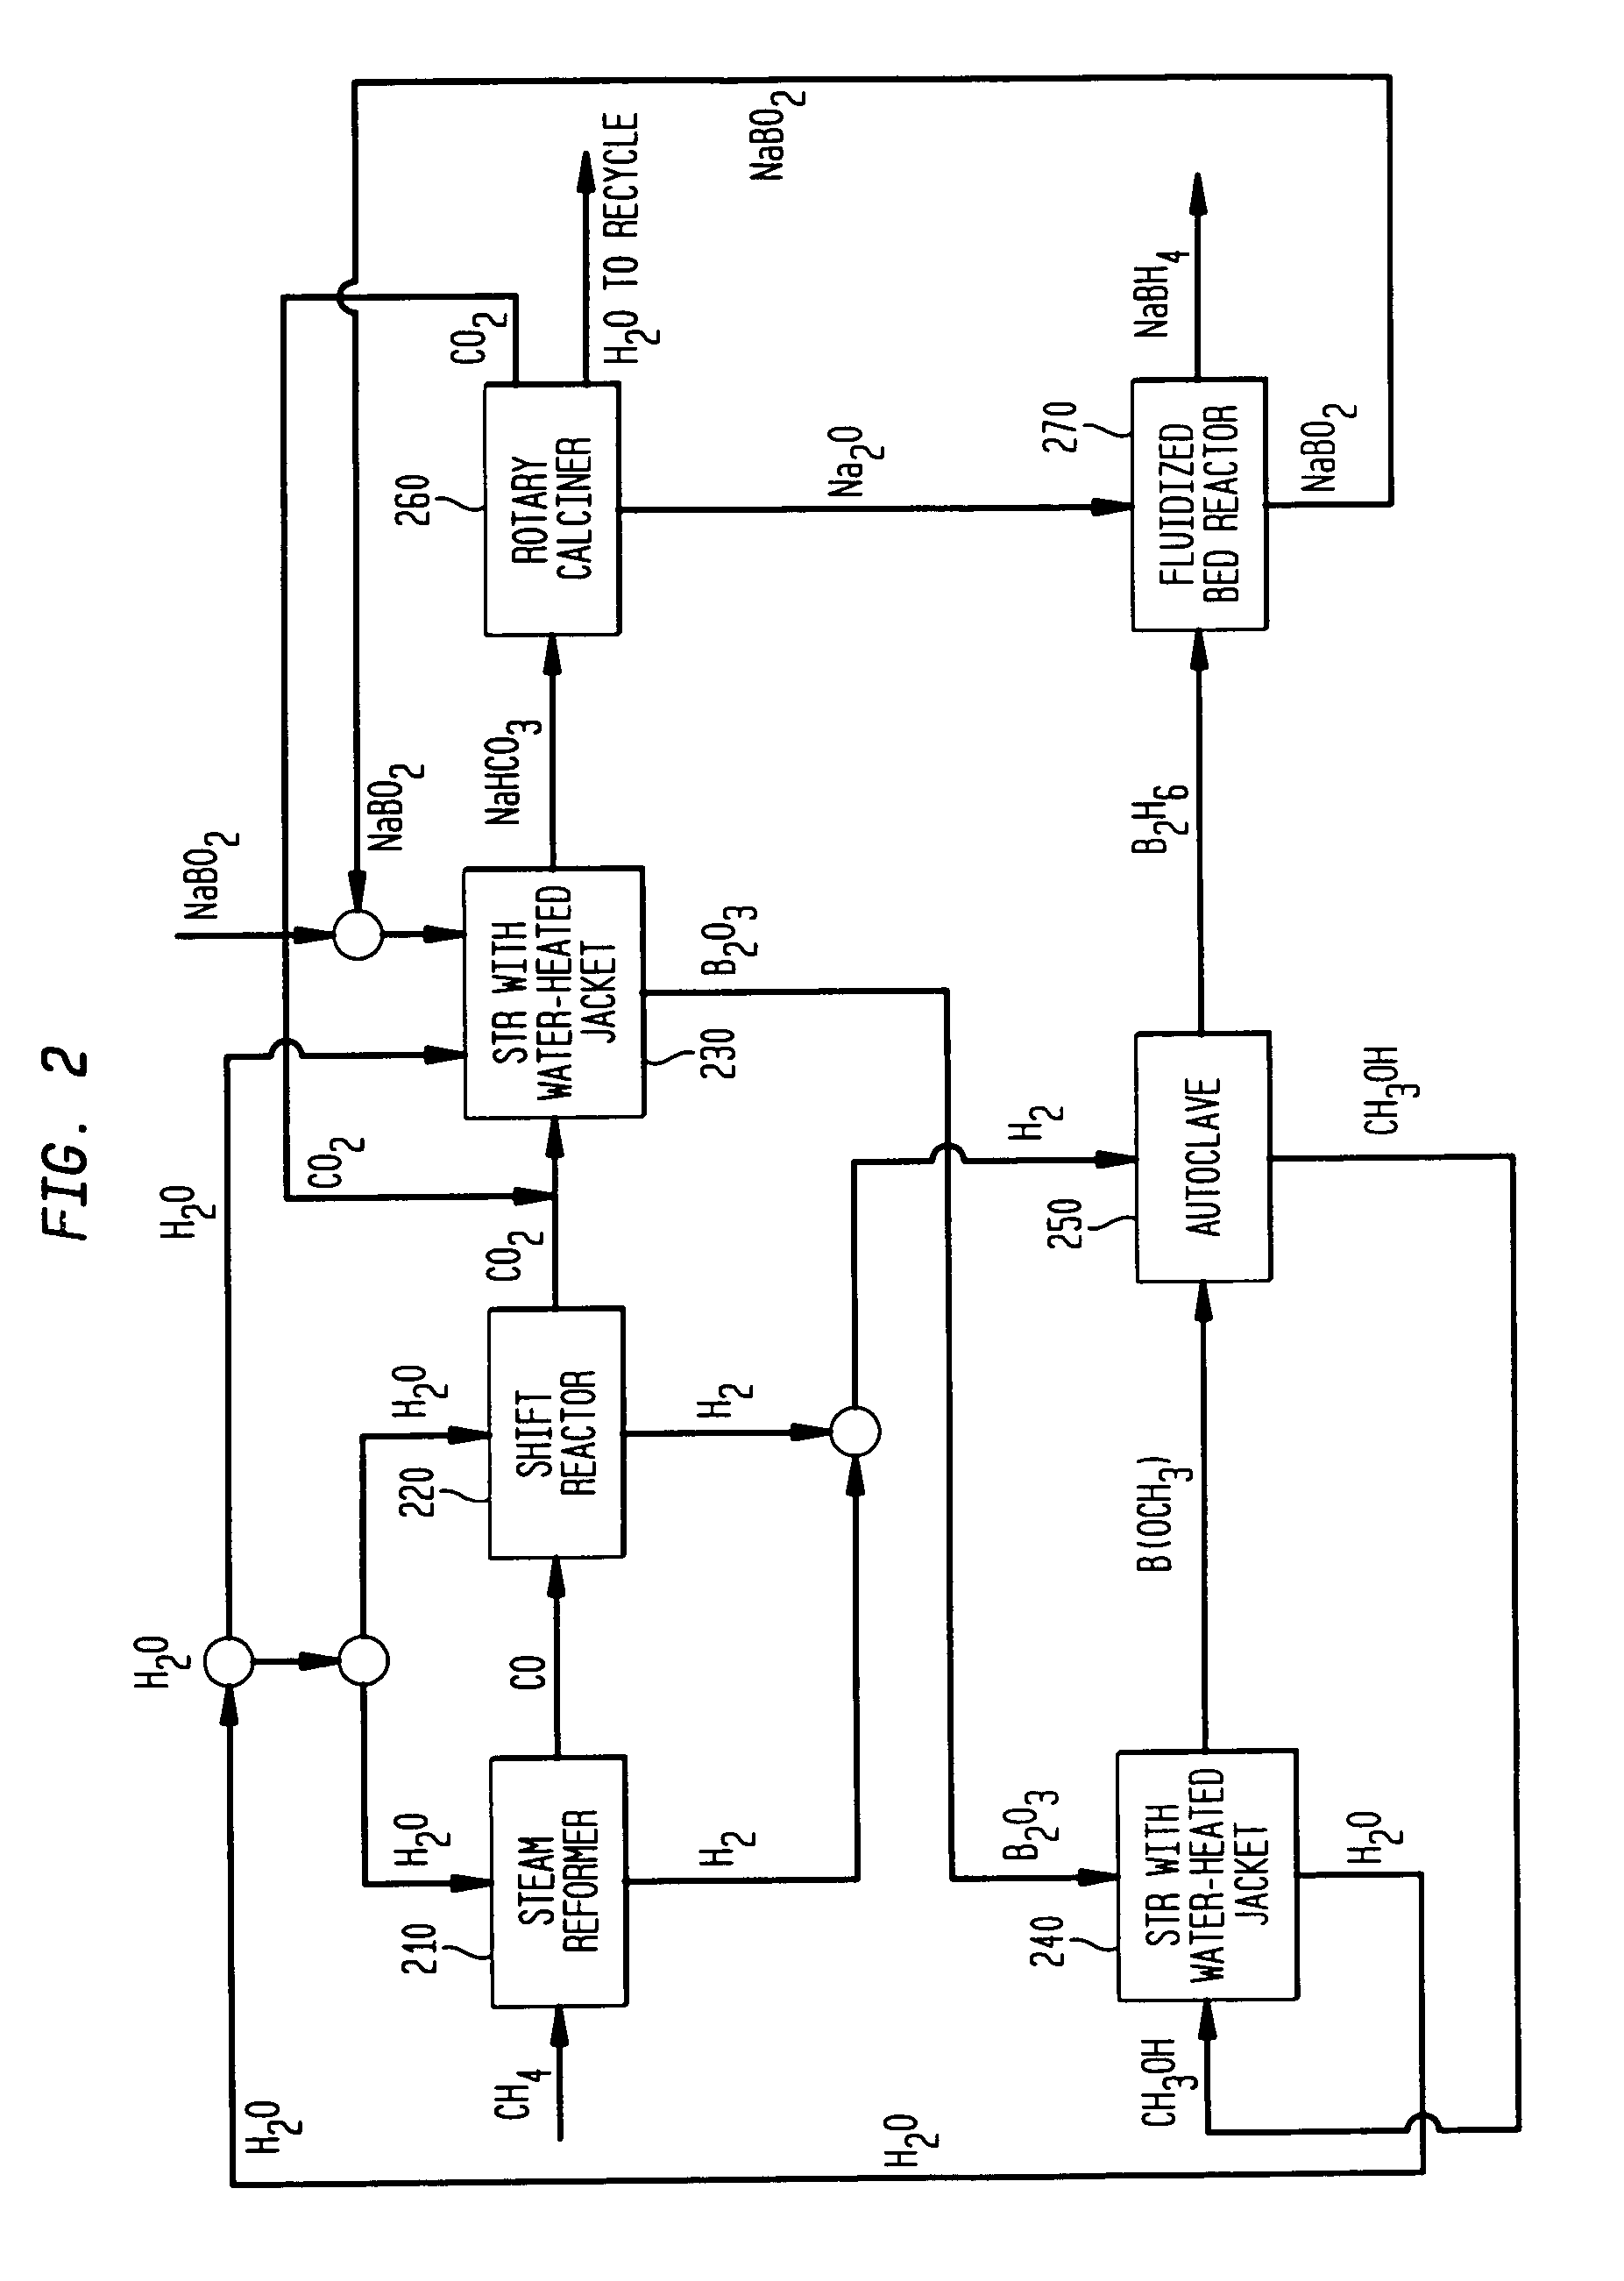 Compositions and processes for synthesizing borohydride compounds